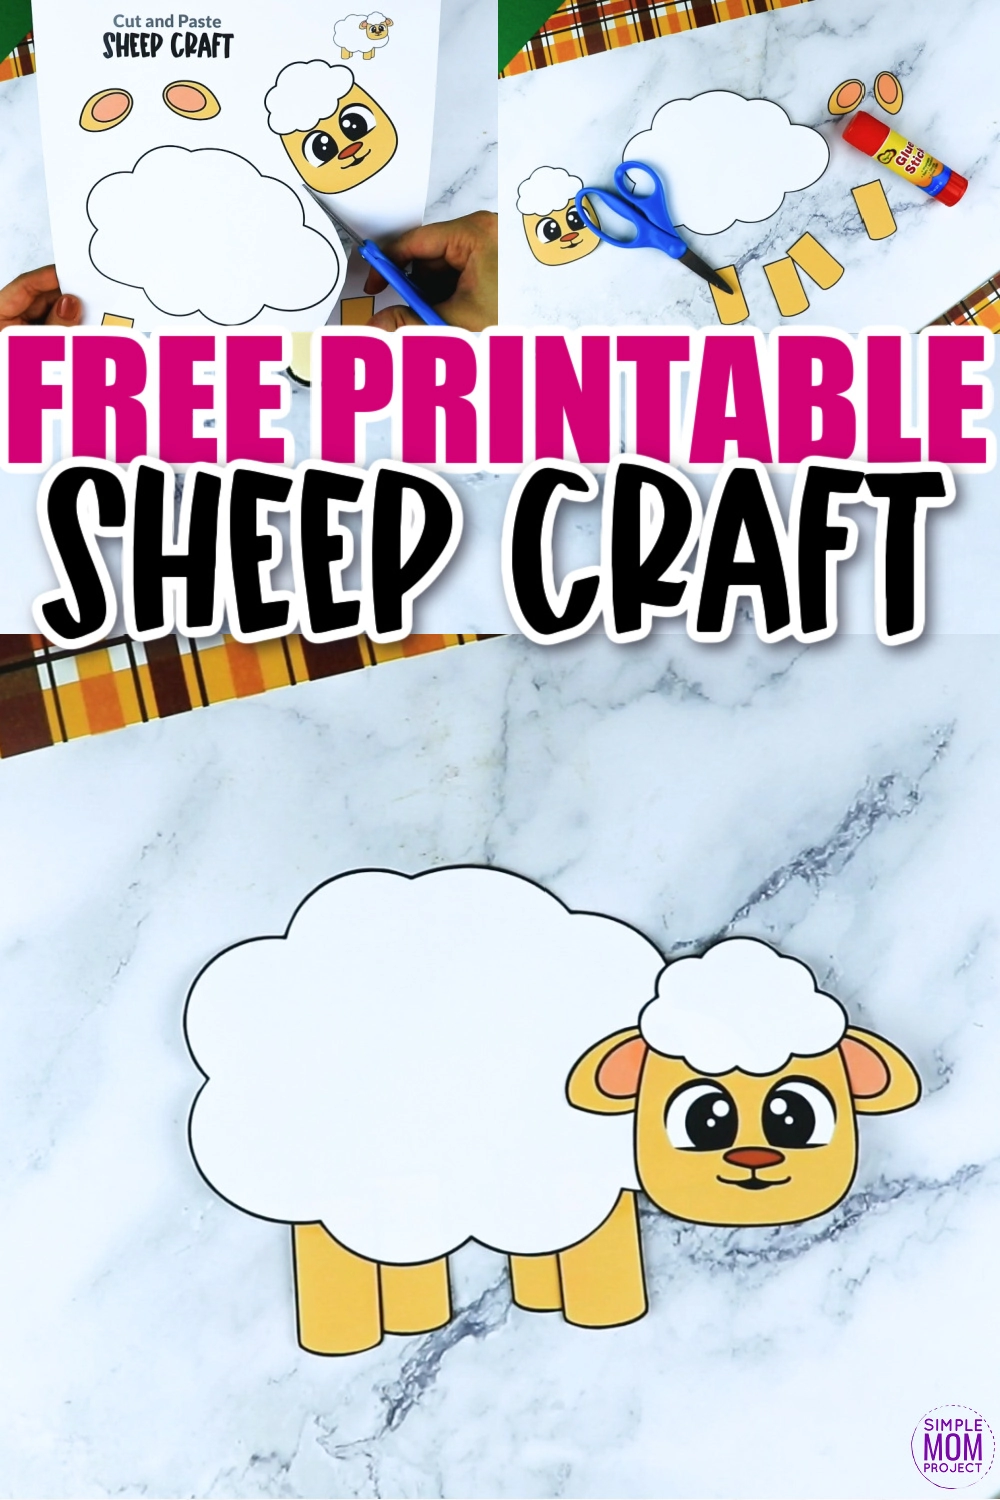 Free printable sheep craft template â simple mom project